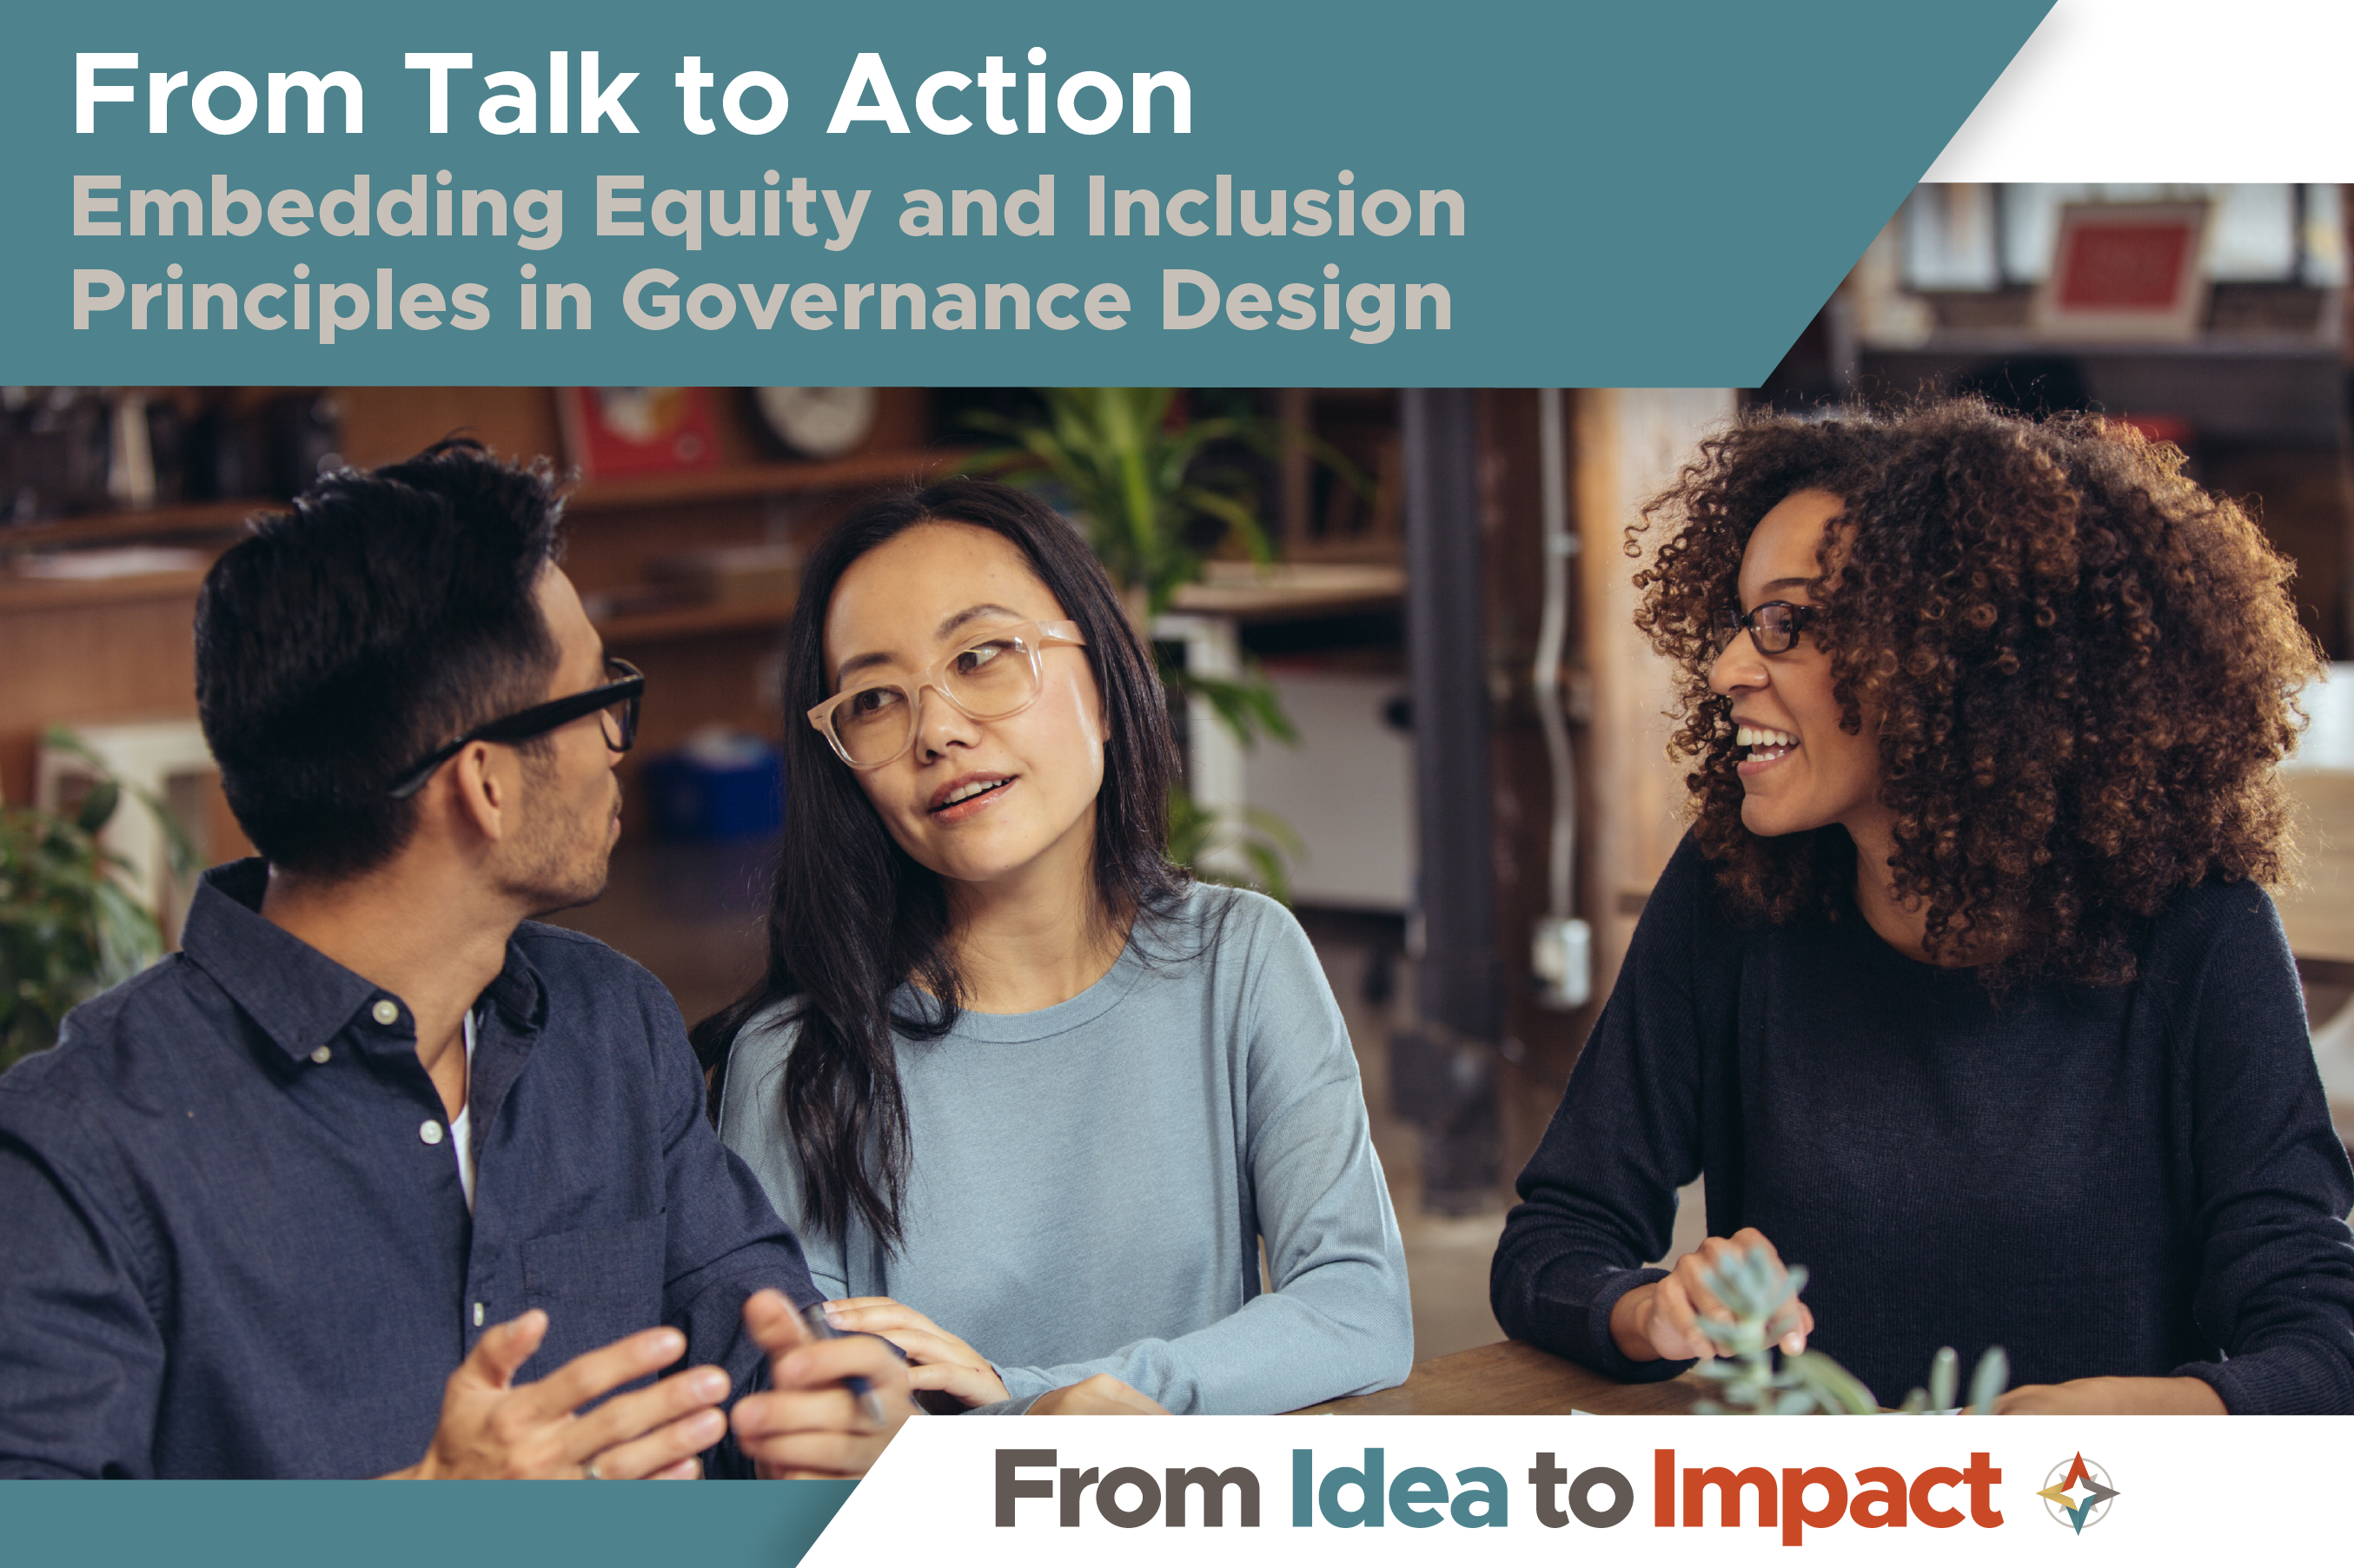 From Talk to Action: Embedding Equity and Inclusion Principles in Governance Design